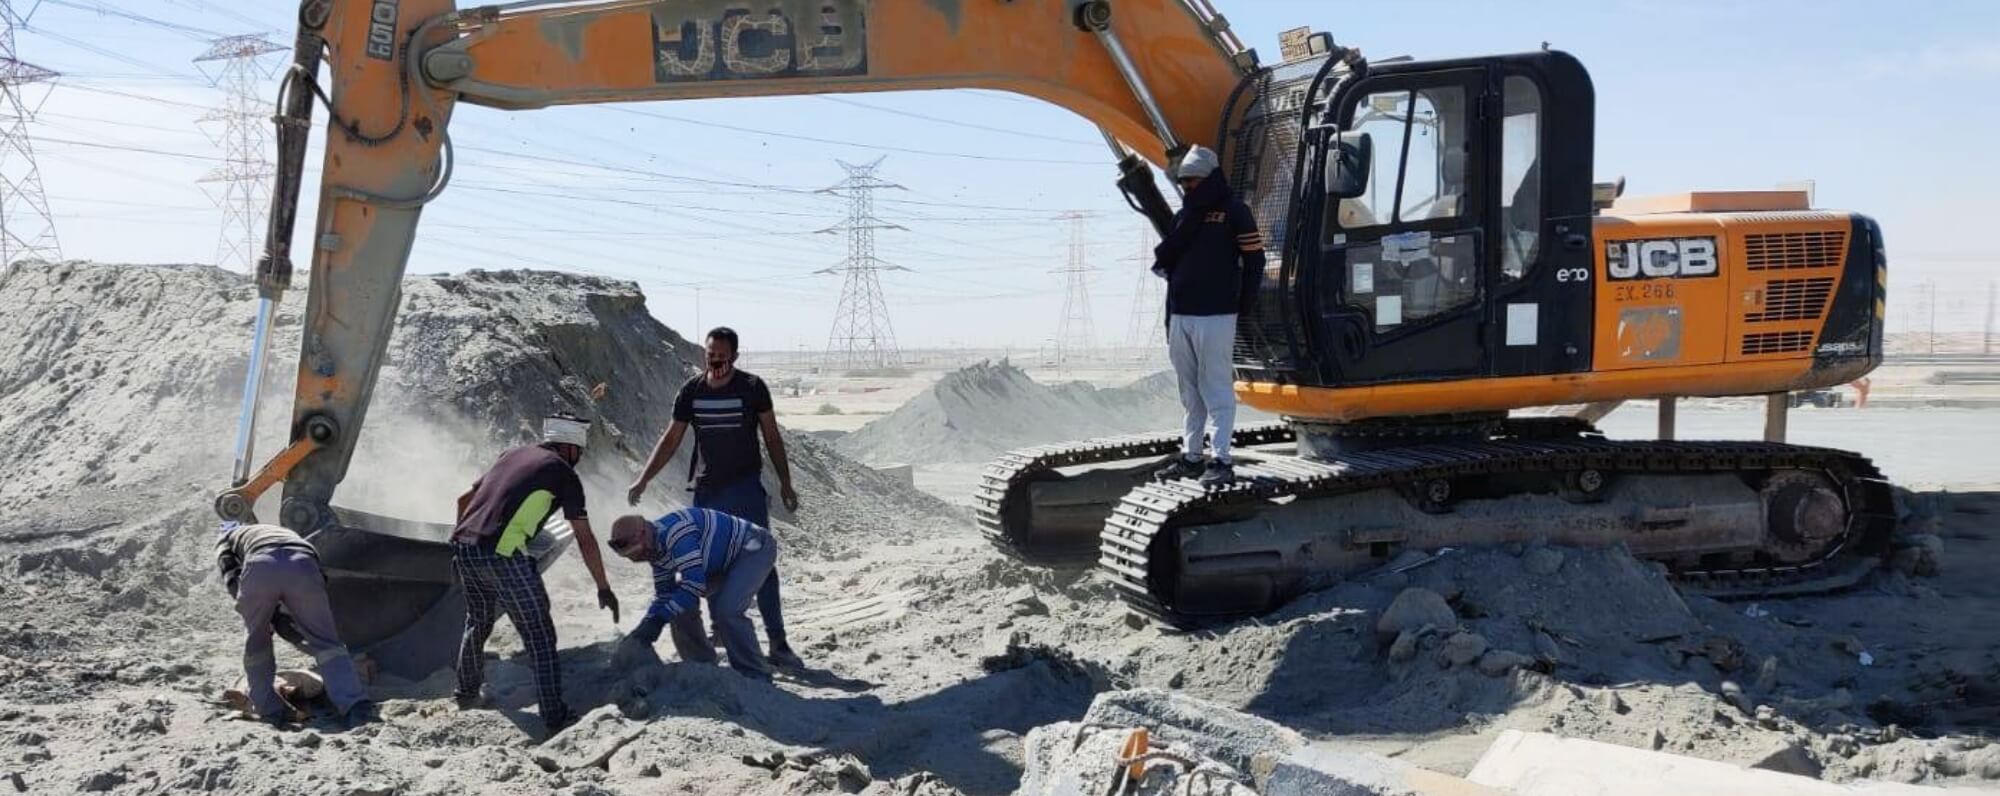 Lusail stadium workers in 2021